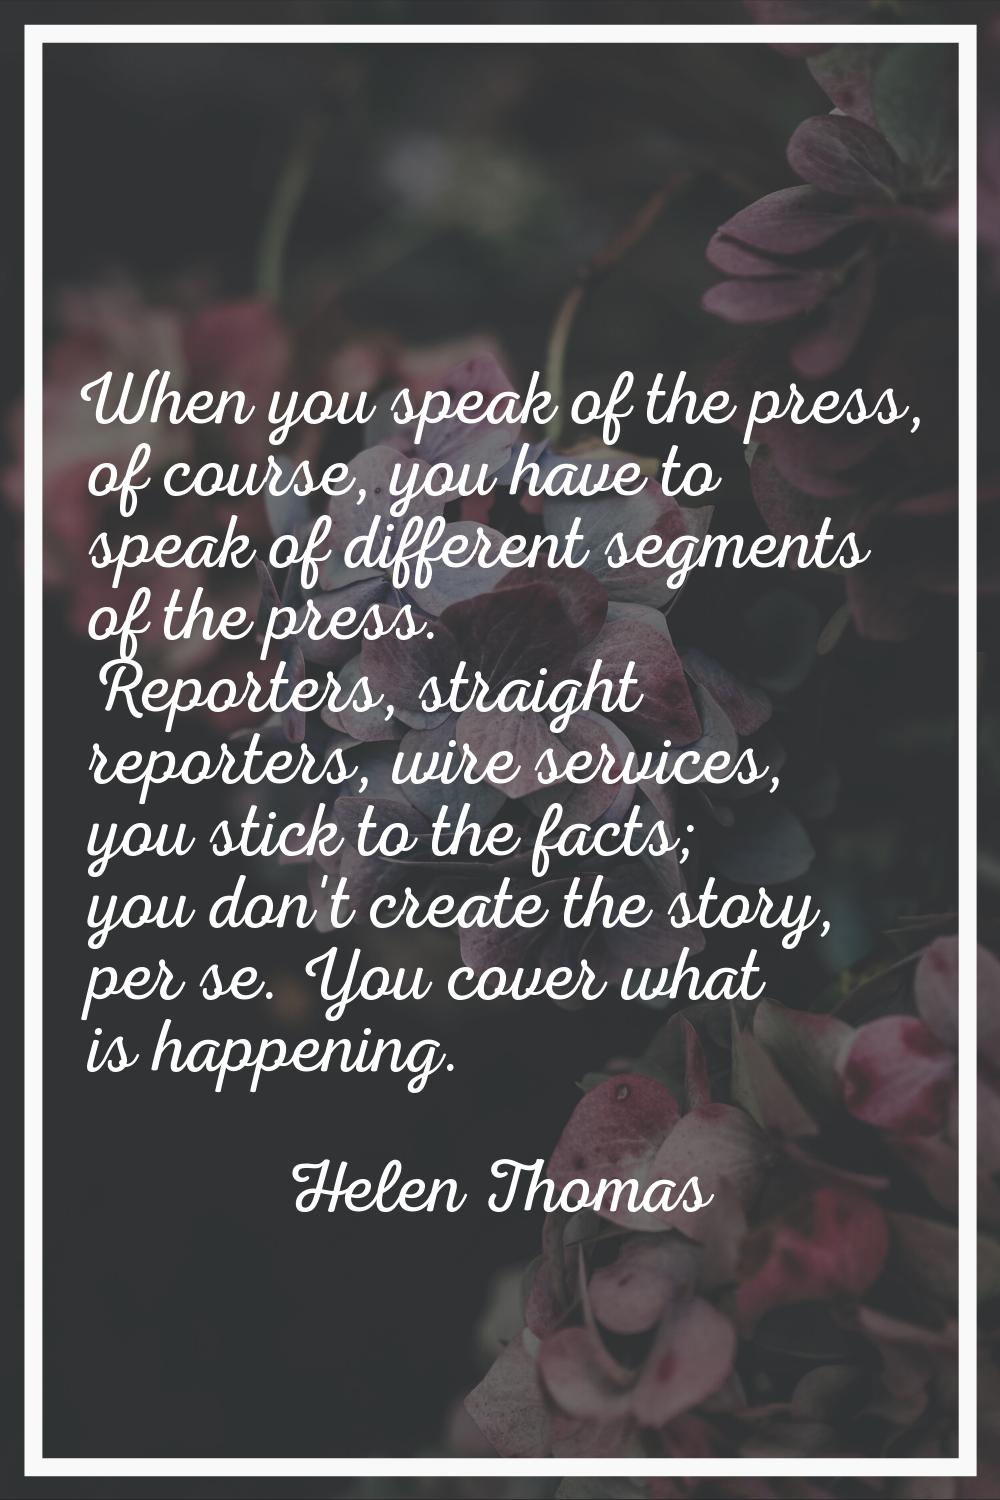 When you speak of the press, of course, you have to speak of different segments of the press. Repor